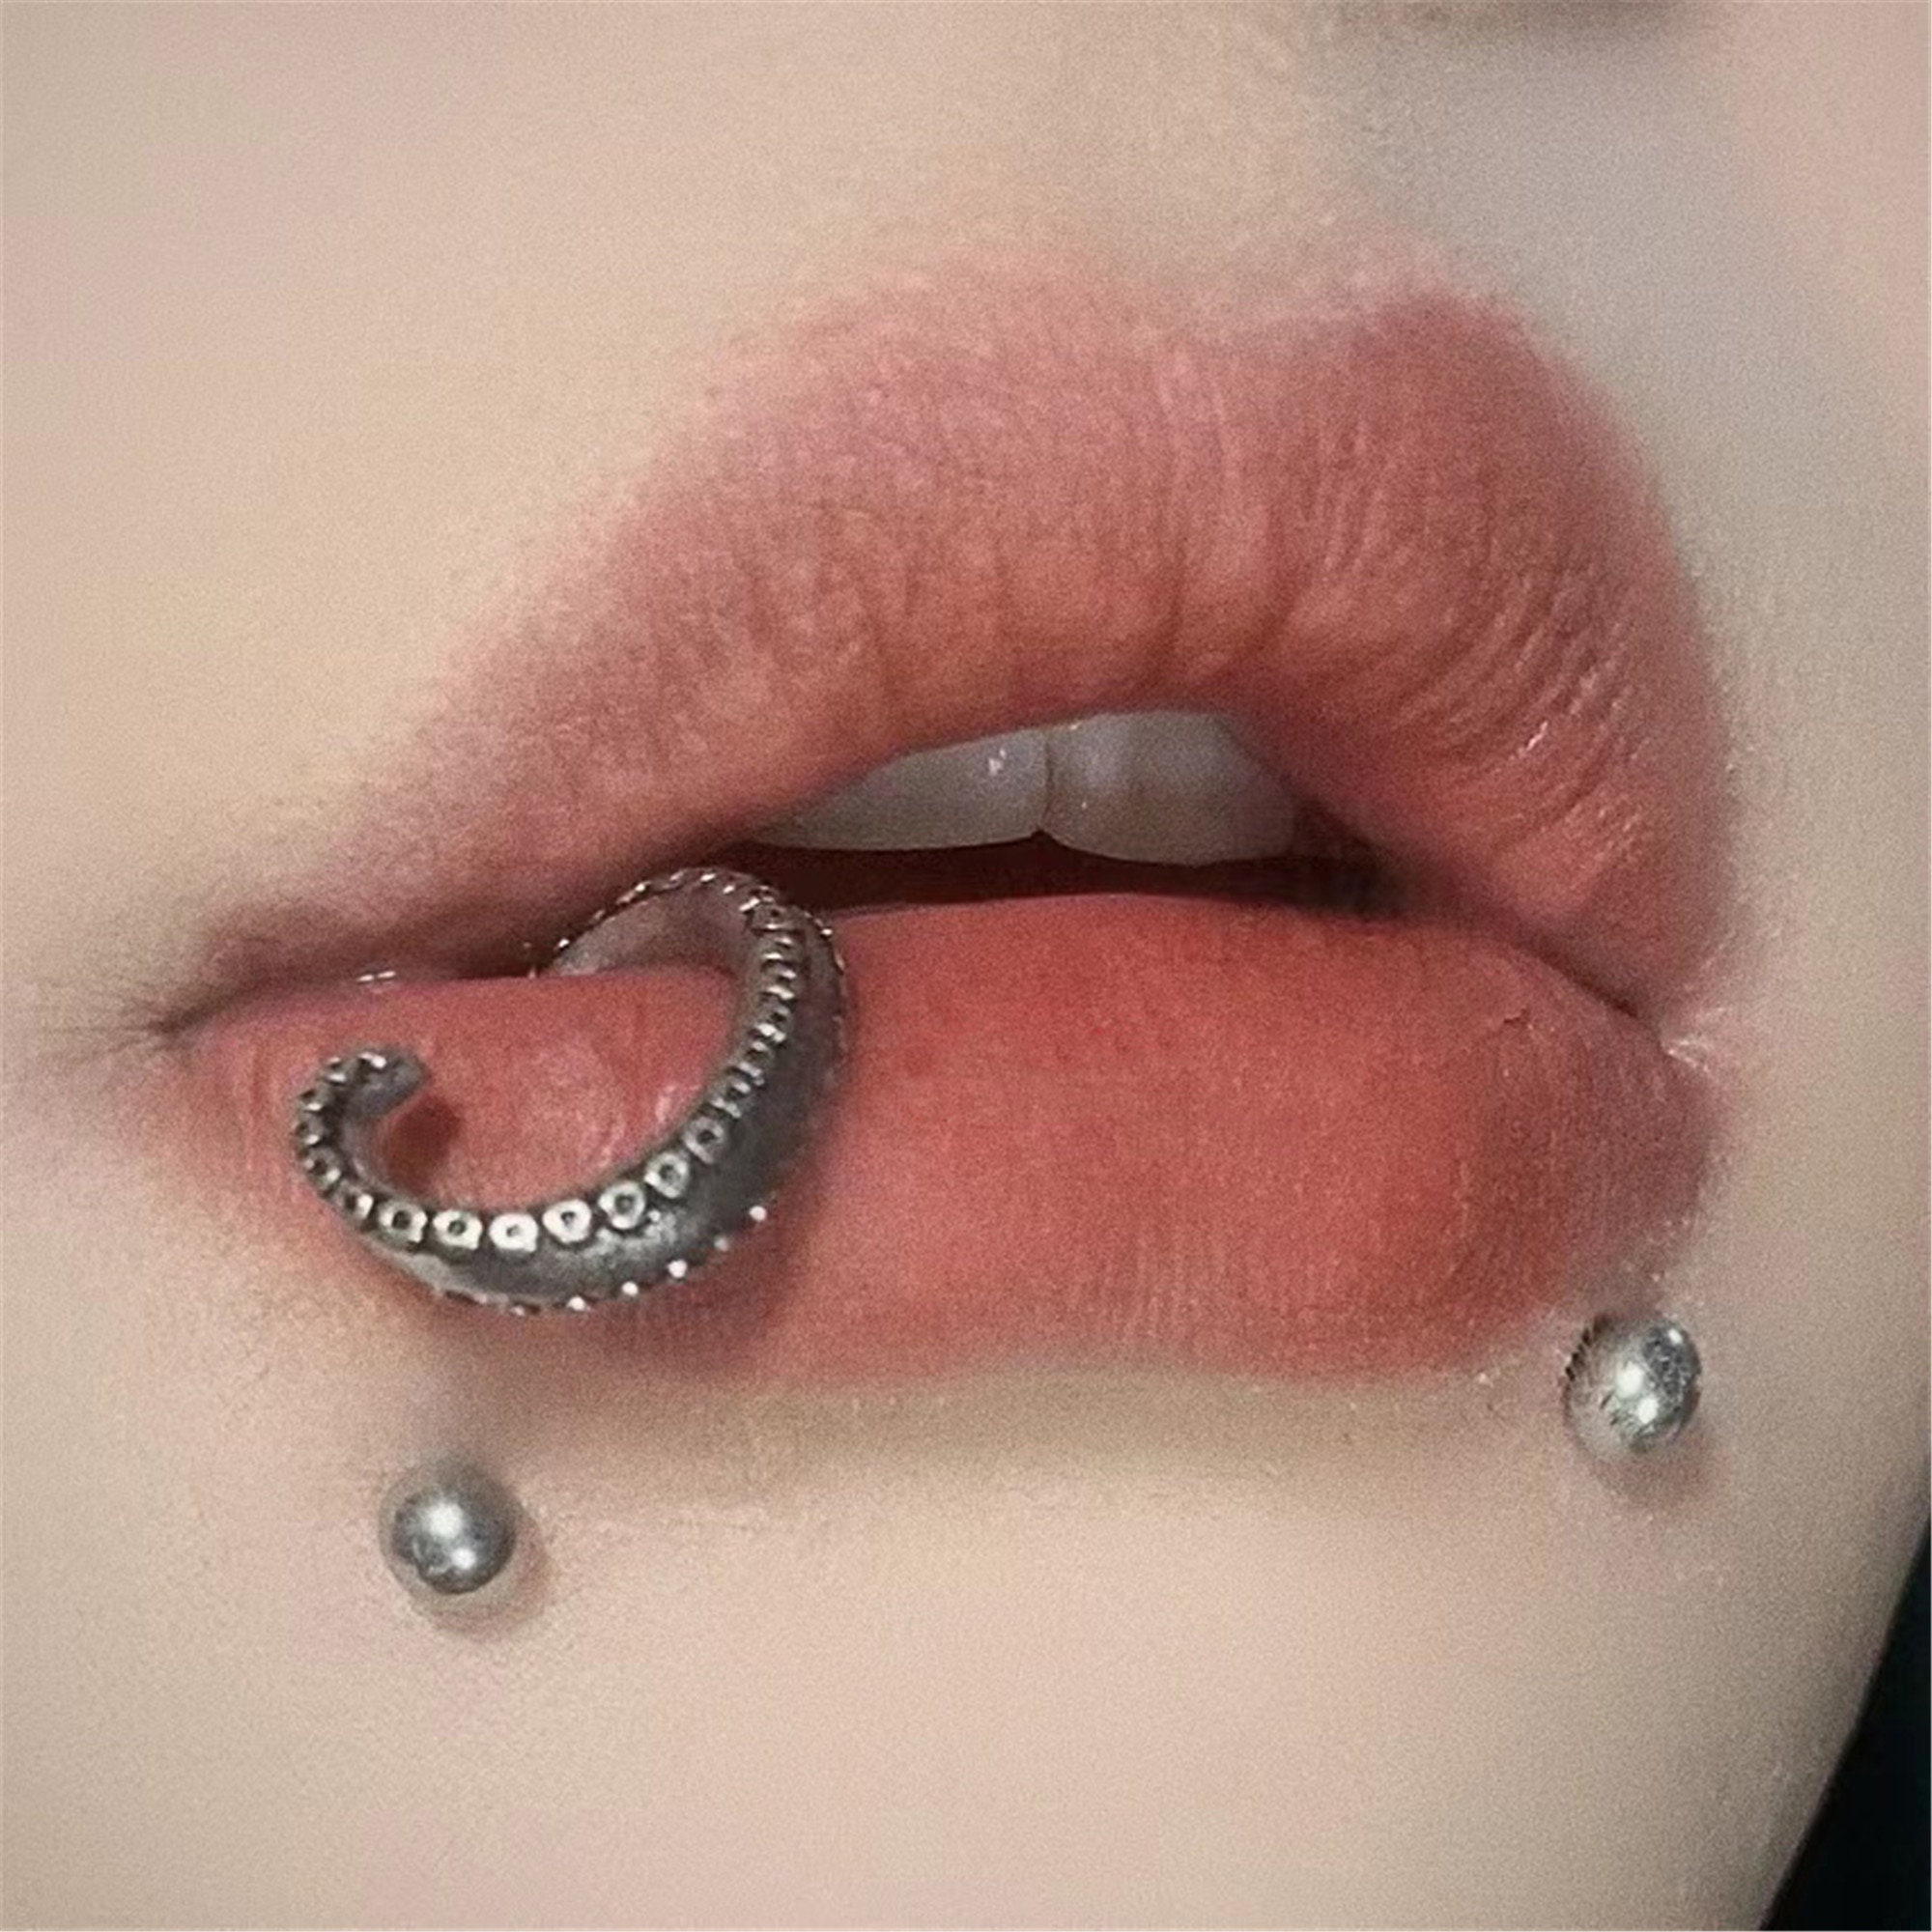 Super Cute Small Naughty Bites Nose Ring Hoop 20g = 0.8mm | Nose / 1/4” = 7 mm